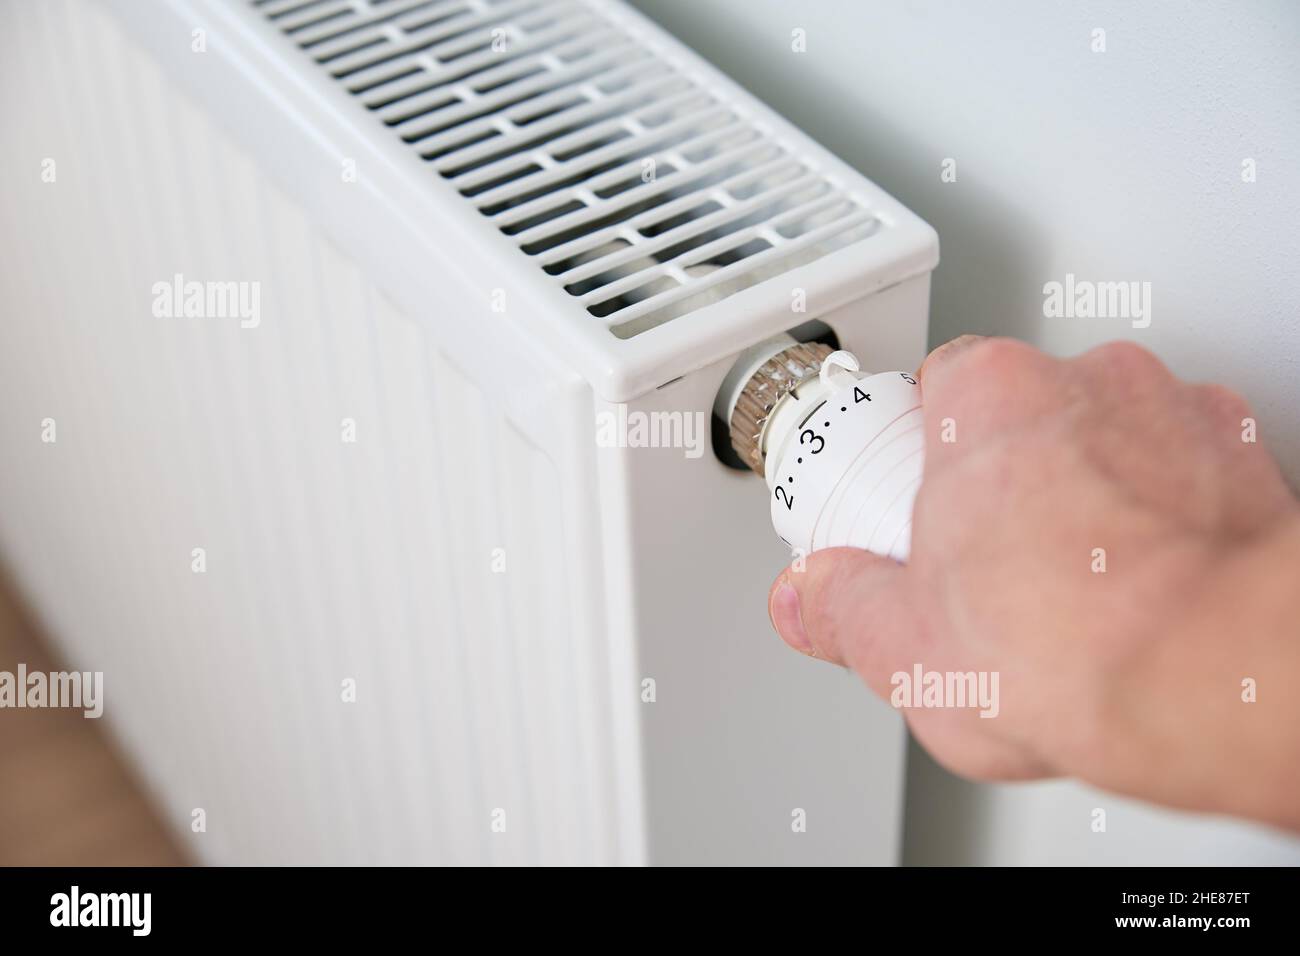 Hand adjusting temperature on heating radiator thermostat, Turning heat radiator knob to control heat in home Stock Photo